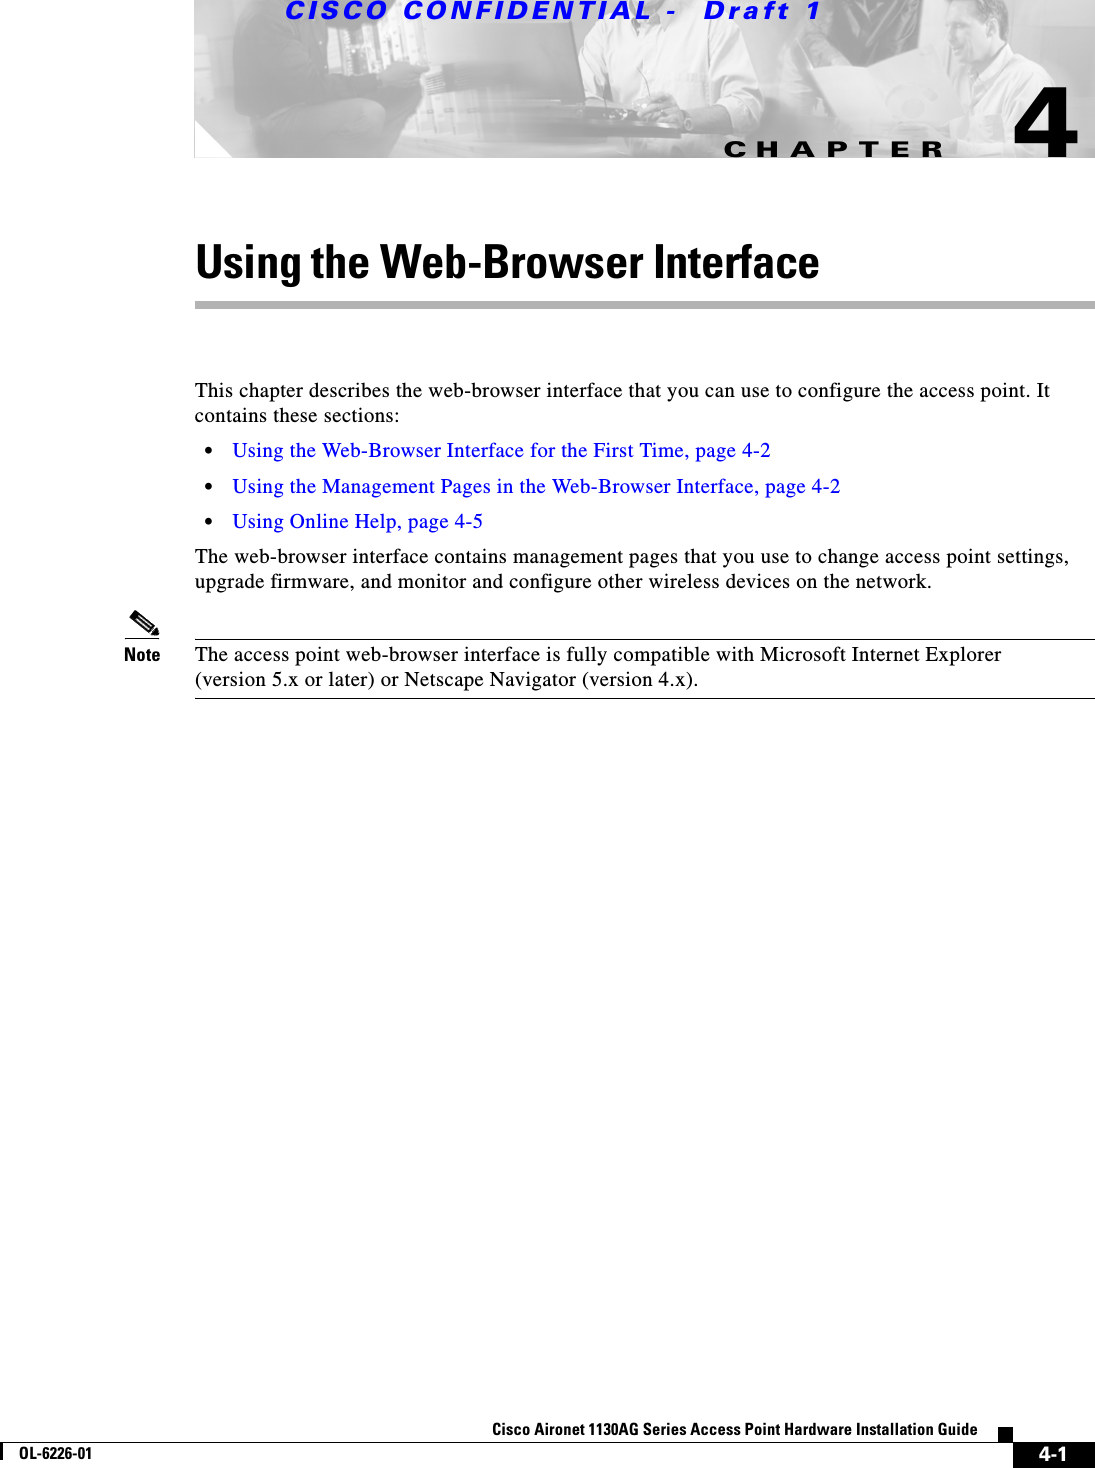 CHAPTER CISCO CONFIDENTIAL -  Draft 14-1Cisco Aironet 1130AG Series Access Point Hardware Installation GuideOL-6226-014Using the Web-Browser InterfaceThis chapter describes the web-browser interface that you can use to configure the access point. It contains these sections:•Using the Web-Browser Interface for the First Time, page 4-2•Using the Management Pages in the Web-Browser Interface, page 4-2•Using Online Help, page 4-5The web-browser interface contains management pages that you use to change access point settings, upgrade firmware, and monitor and configure other wireless devices on the network.Note The access point web-browser interface is fully compatible with Microsoft Internet Explorer(version 5.x or later) or Netscape Navigator (version 4.x).